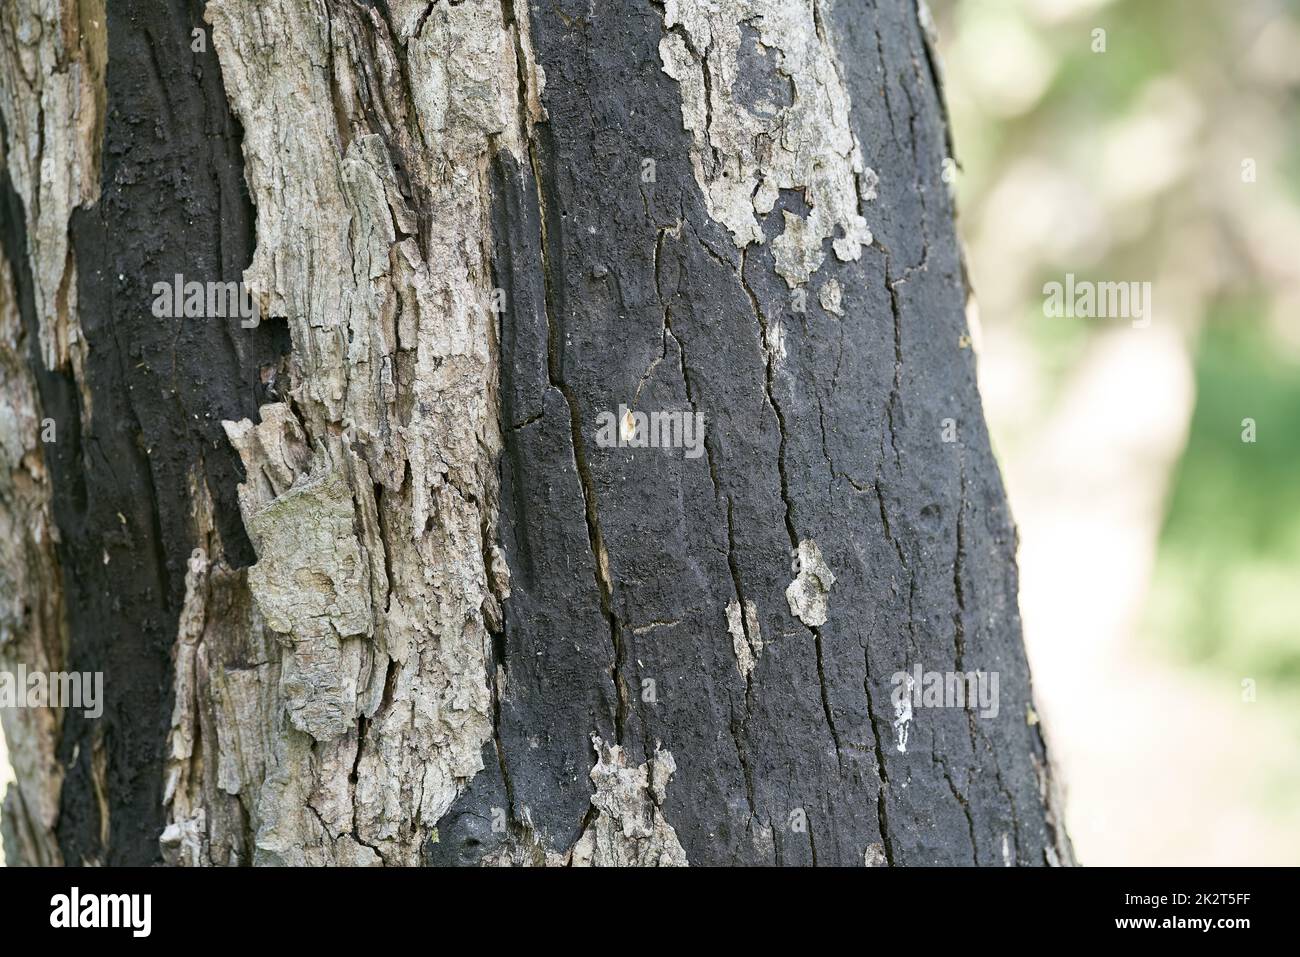 Sooty bark disease RuÃŸrindenkrankheit caused by the fungus Cryptostroma corticale on a dead maple tree in Magdeburg in Germany Stock Photo